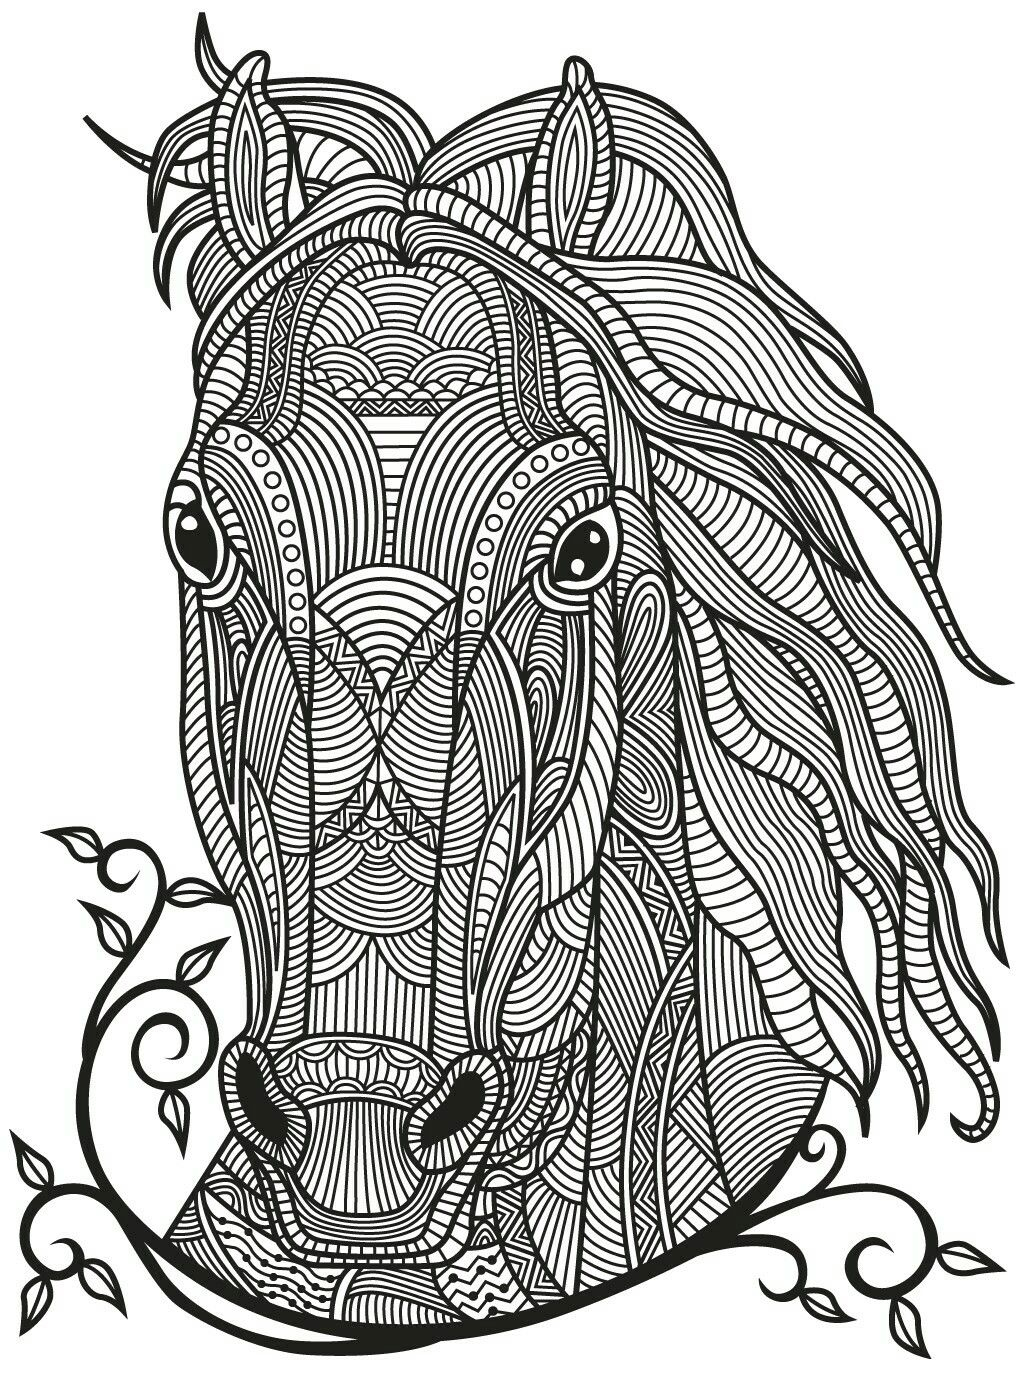 Pin By Nina Bondesson On Coloring Pages  Horse Coloring Pages, Mandala intérieur Mandala Cheval